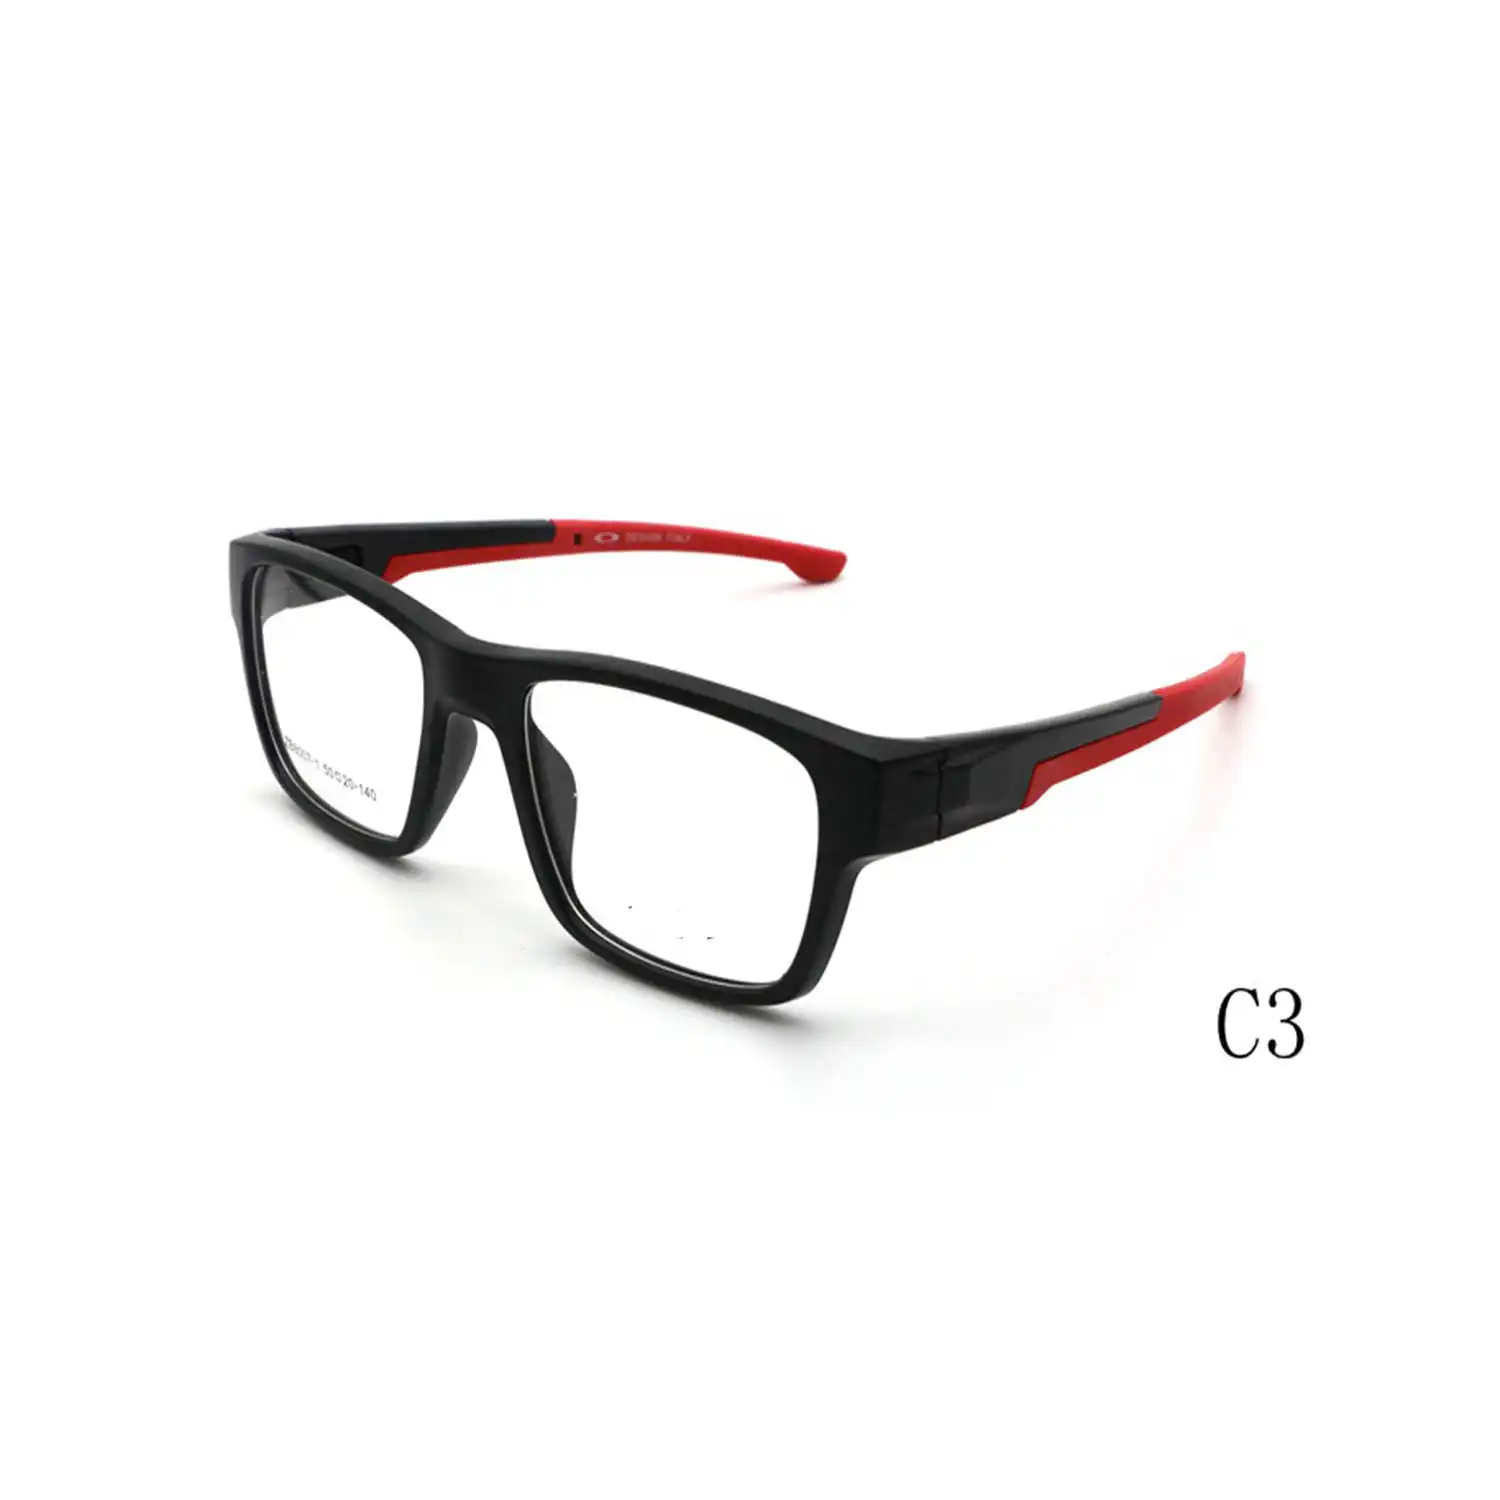 

CP optical glasses glasses frames cheap Wholesales fashion high quality